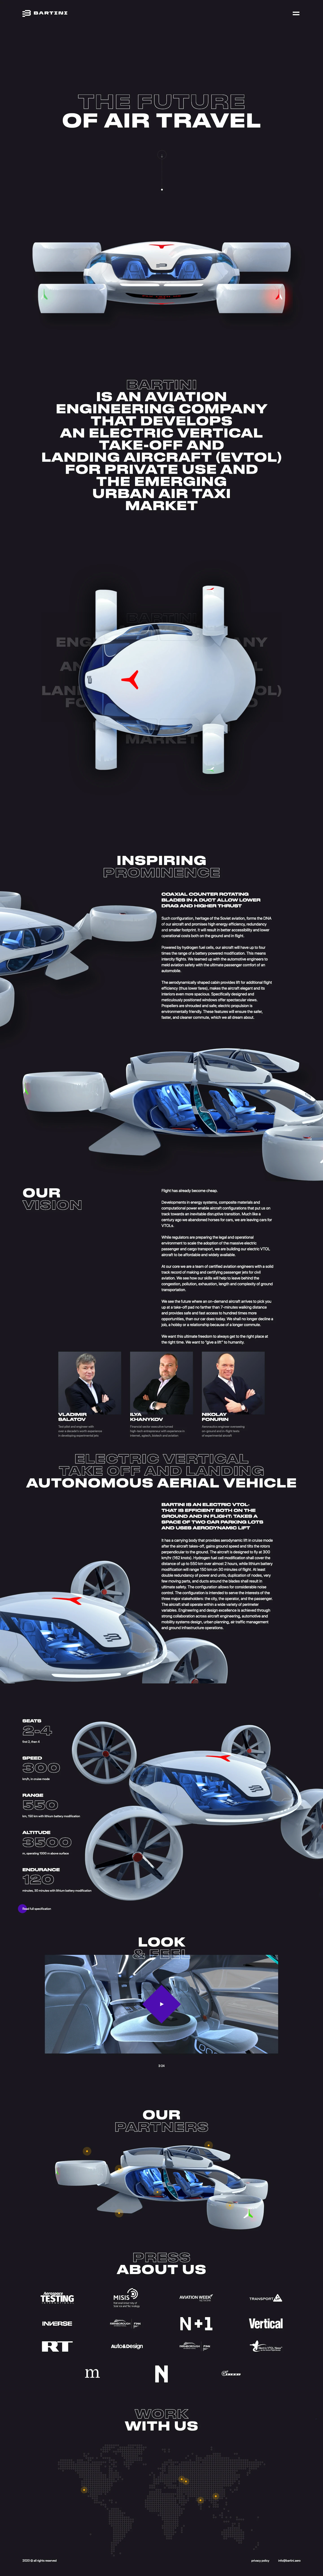 Bartini Landing Page Example: The eVTOL for the world. The future of air travel.